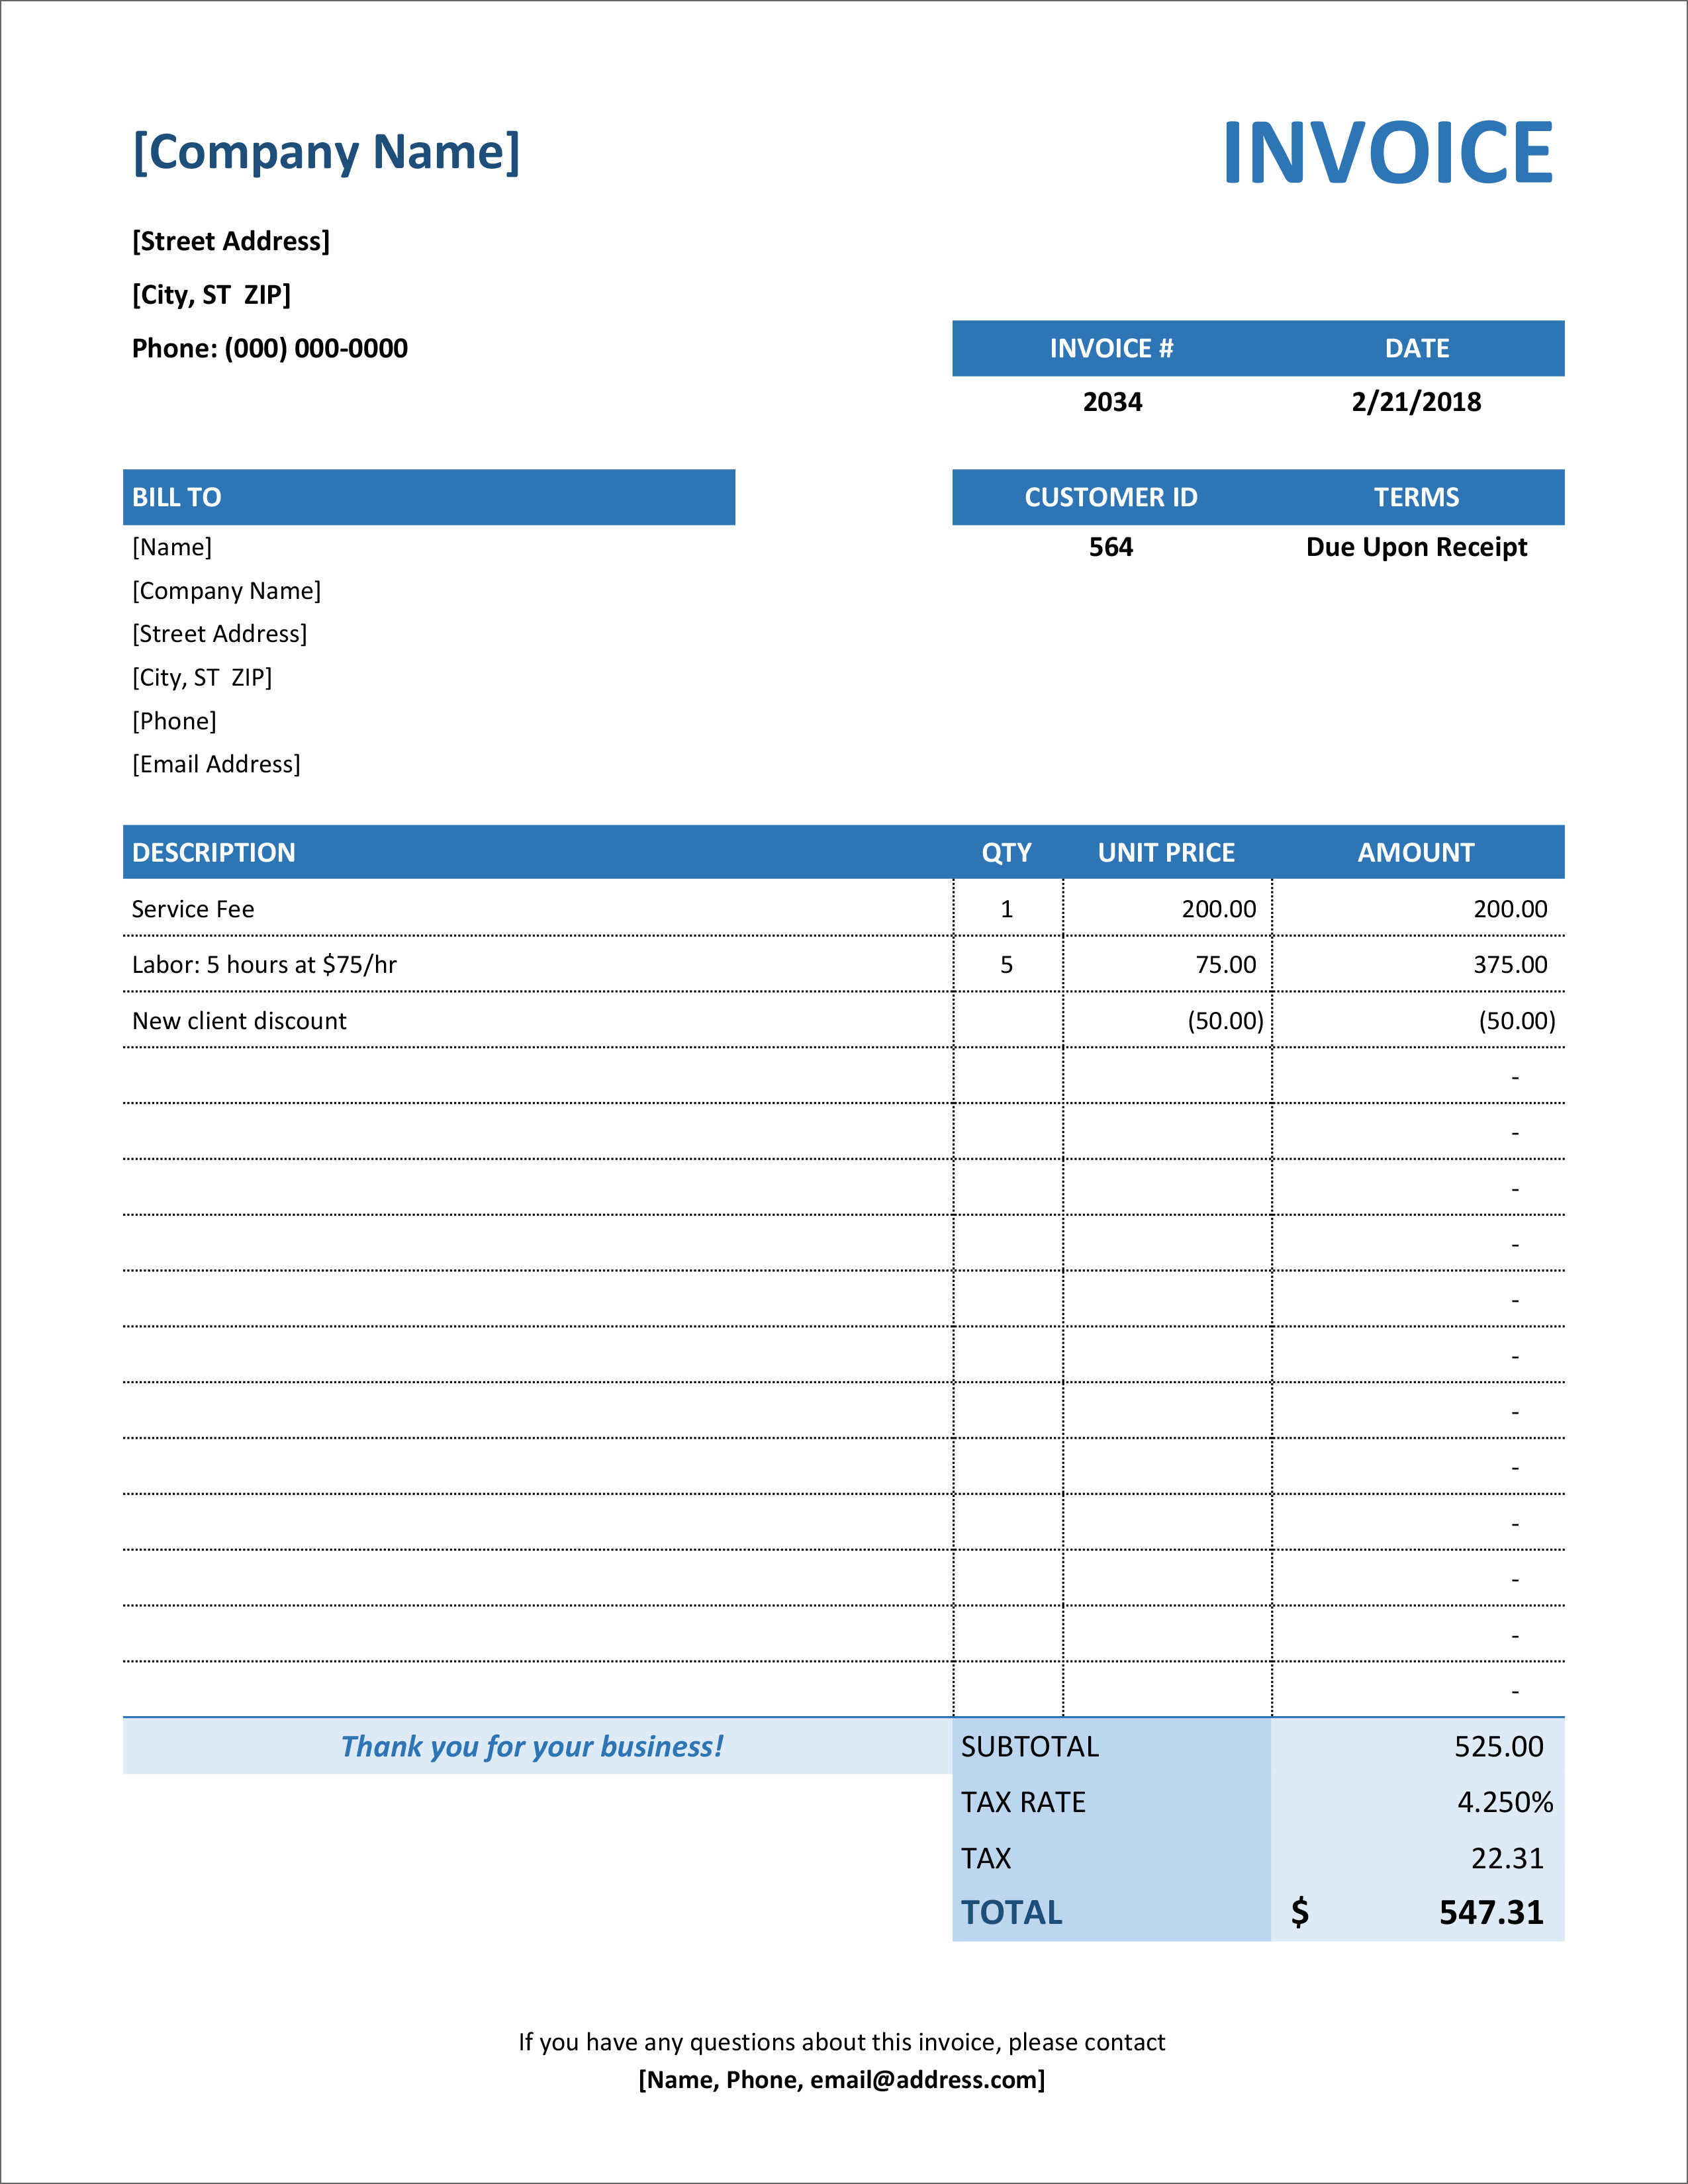 23 Free Invoice Templates In Microsoft Excel And DOCX Formats Throughout Invoice Tracking Spreadsheet Template